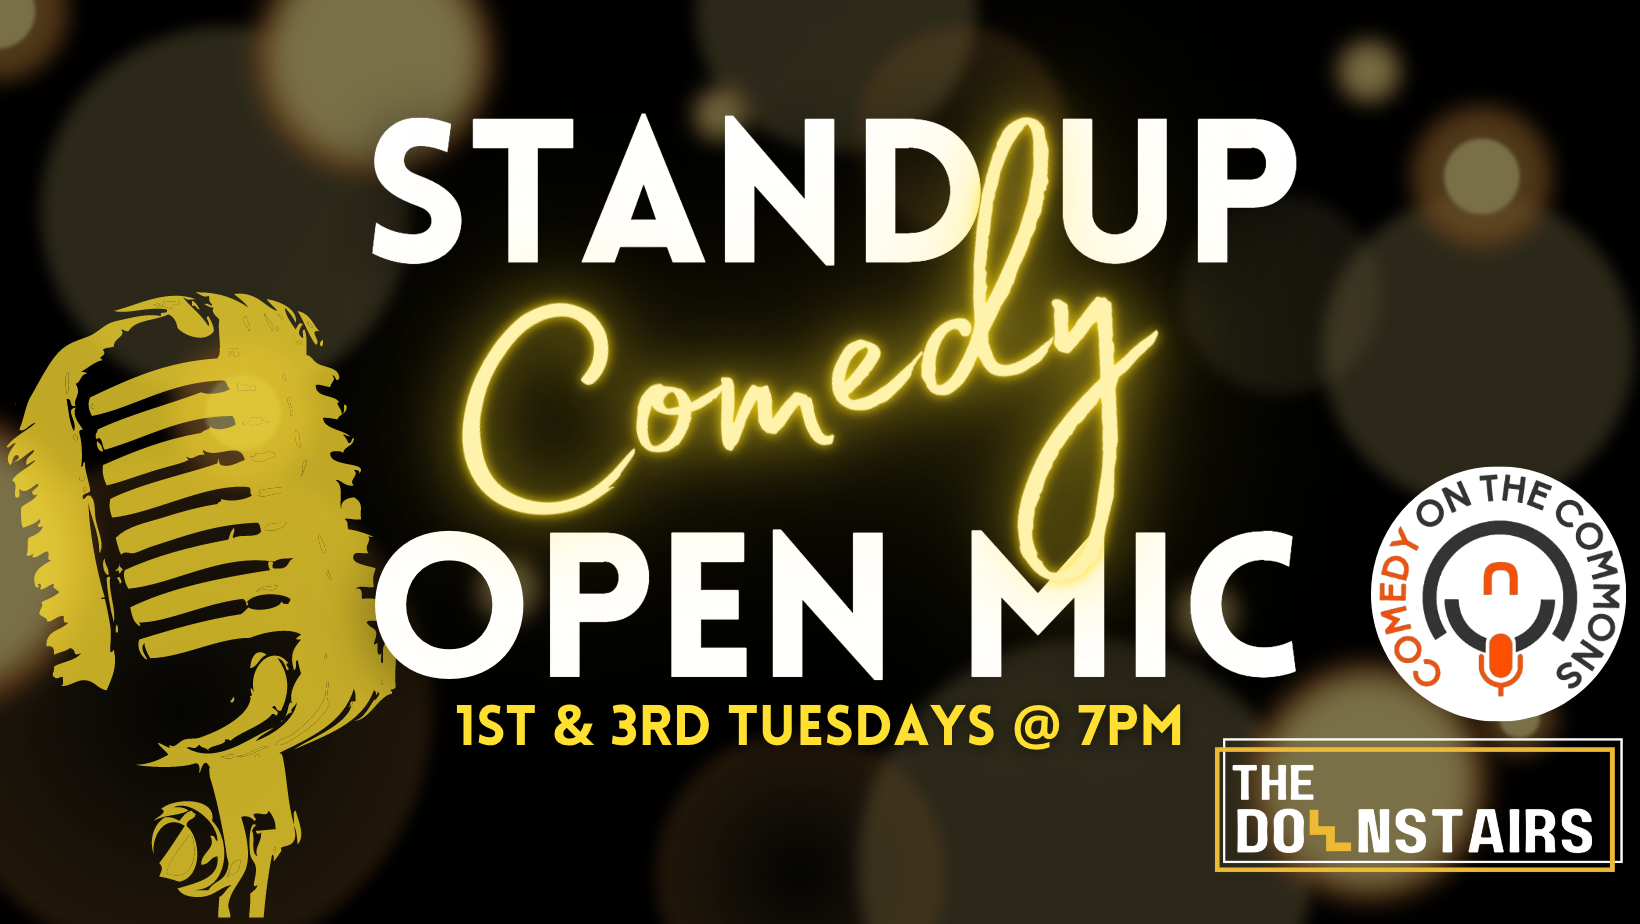 Open Mic Stand Up Comedy Night